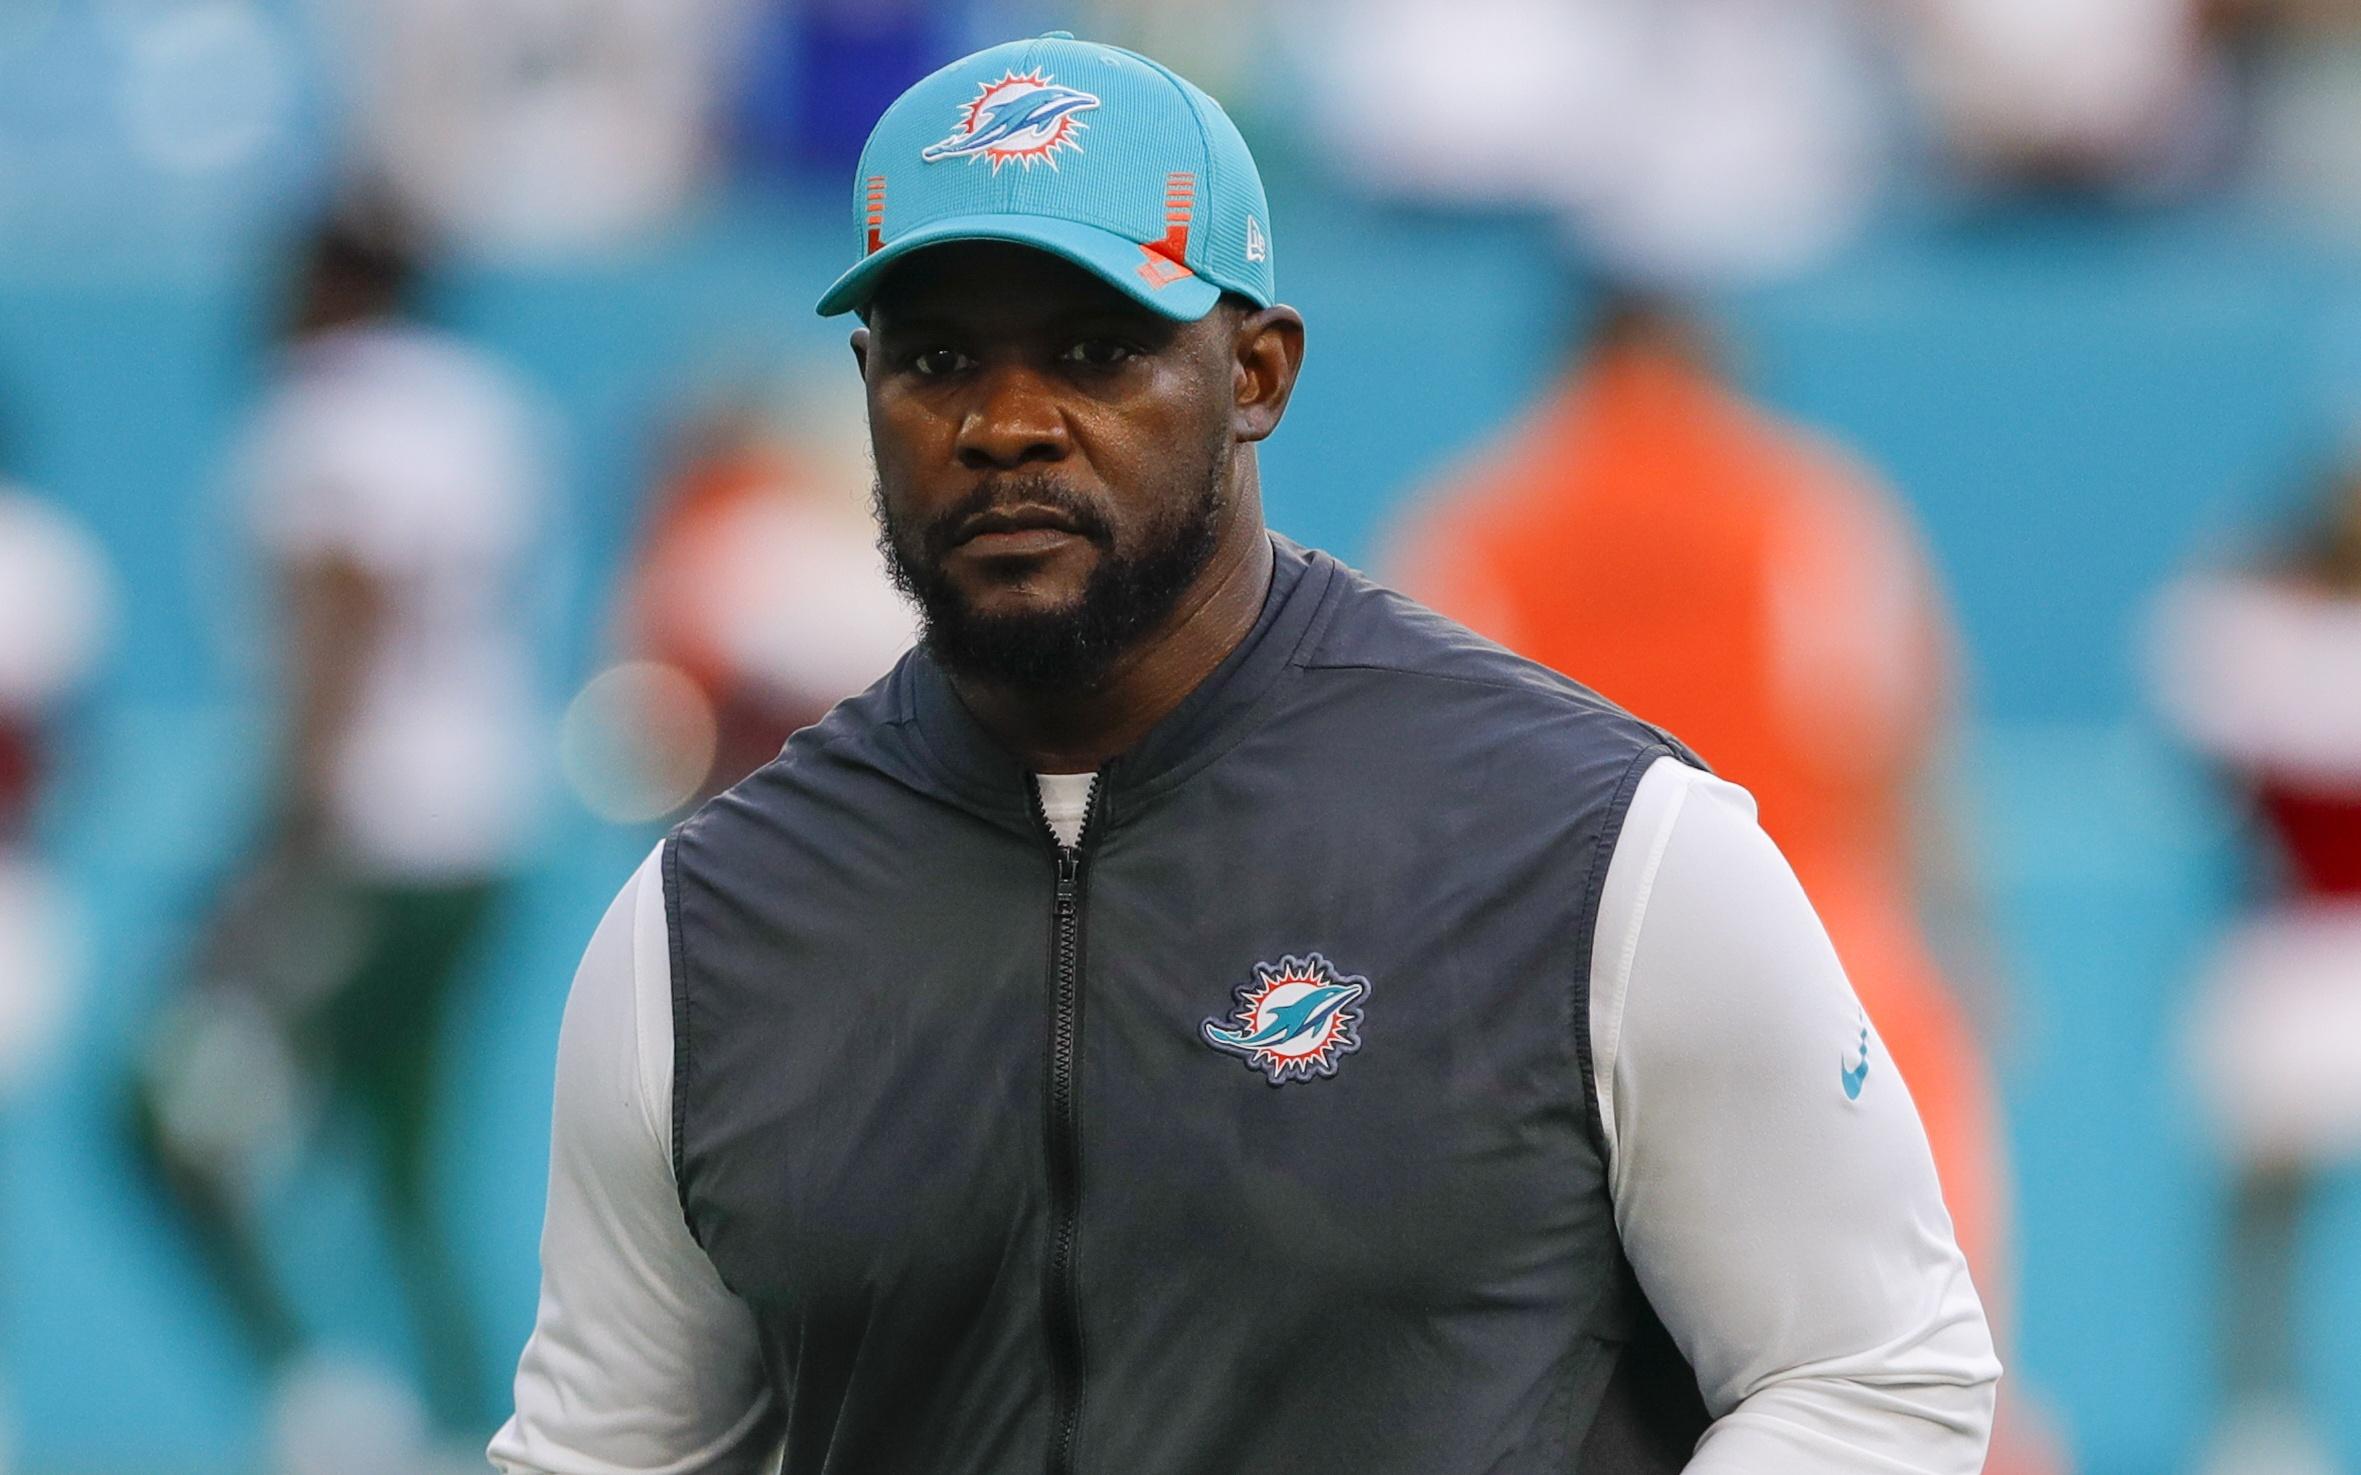 Dec 19, 2021; Miami Gardens, Florida, USA; Miami Dolphins head coach Brian Flores runs off the field after winning the game against the New York Jets at Hard Rock Stadium. Mandatory Credit: Sam Navarro-USA TODAY Sports / © Sam Navarro-USA TODAY Sports